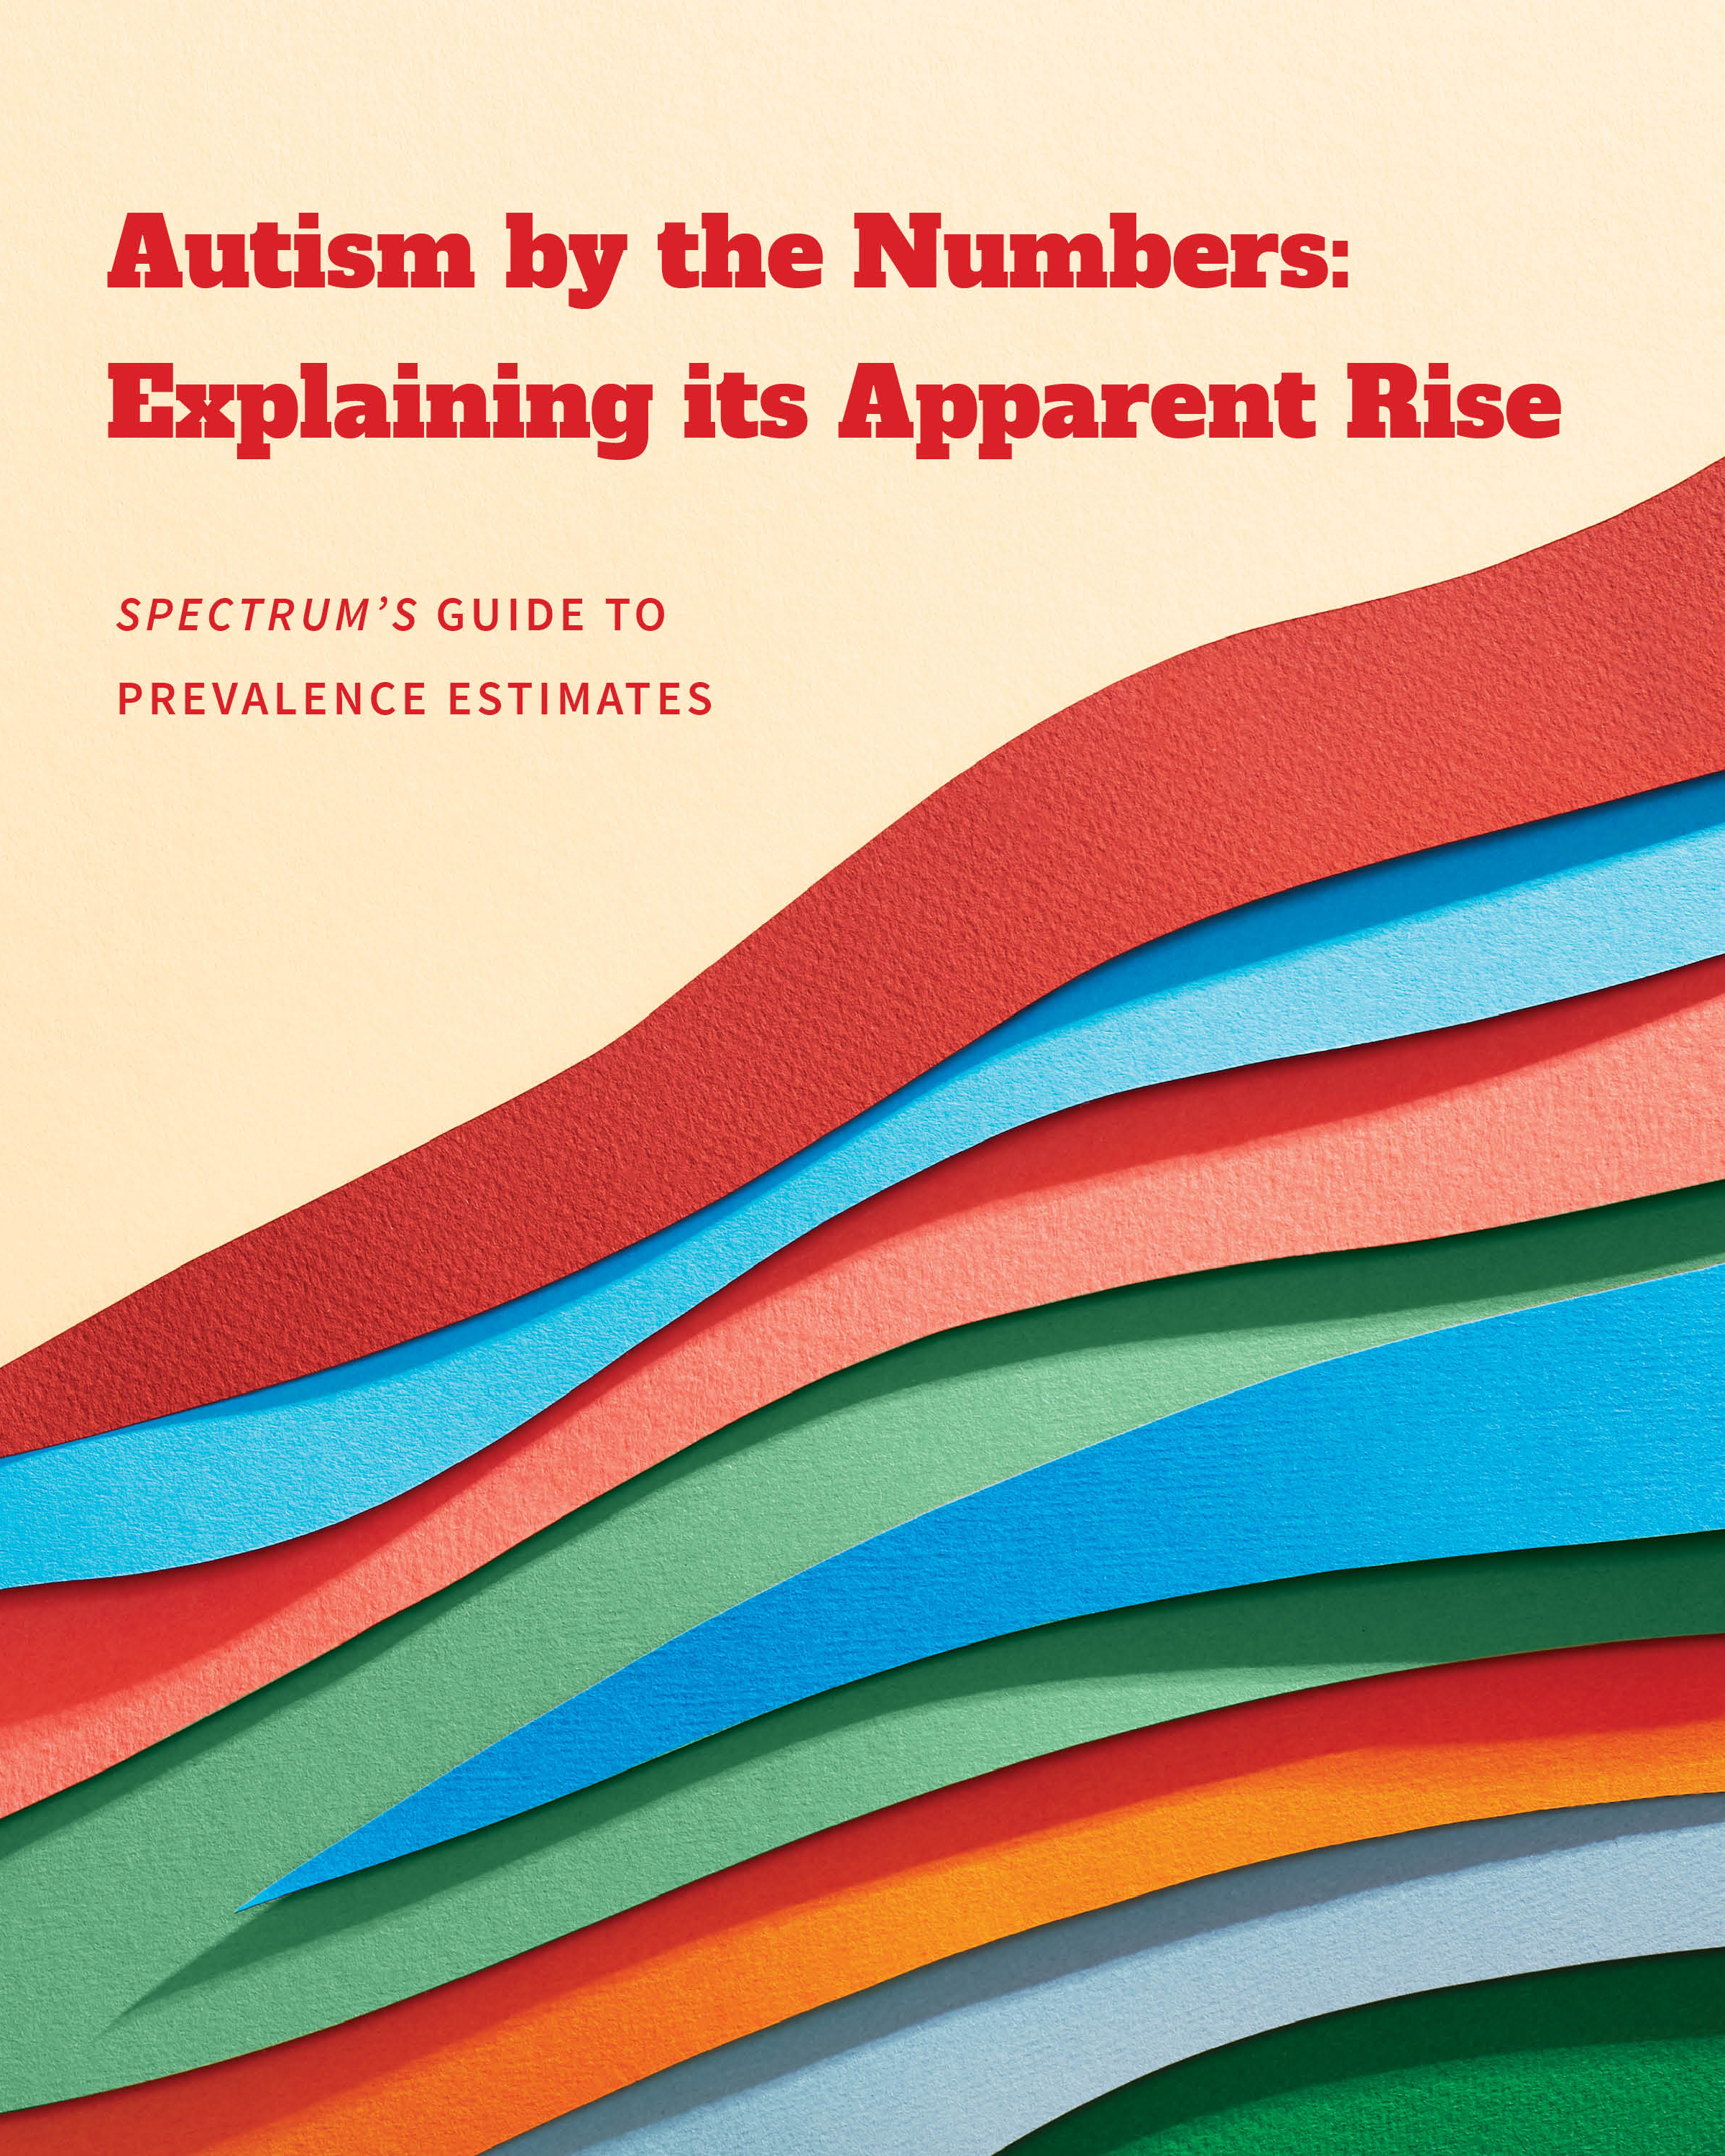 Spectrum - "Autism by the Numbers: Explaining its Apparent Rise," November 2021